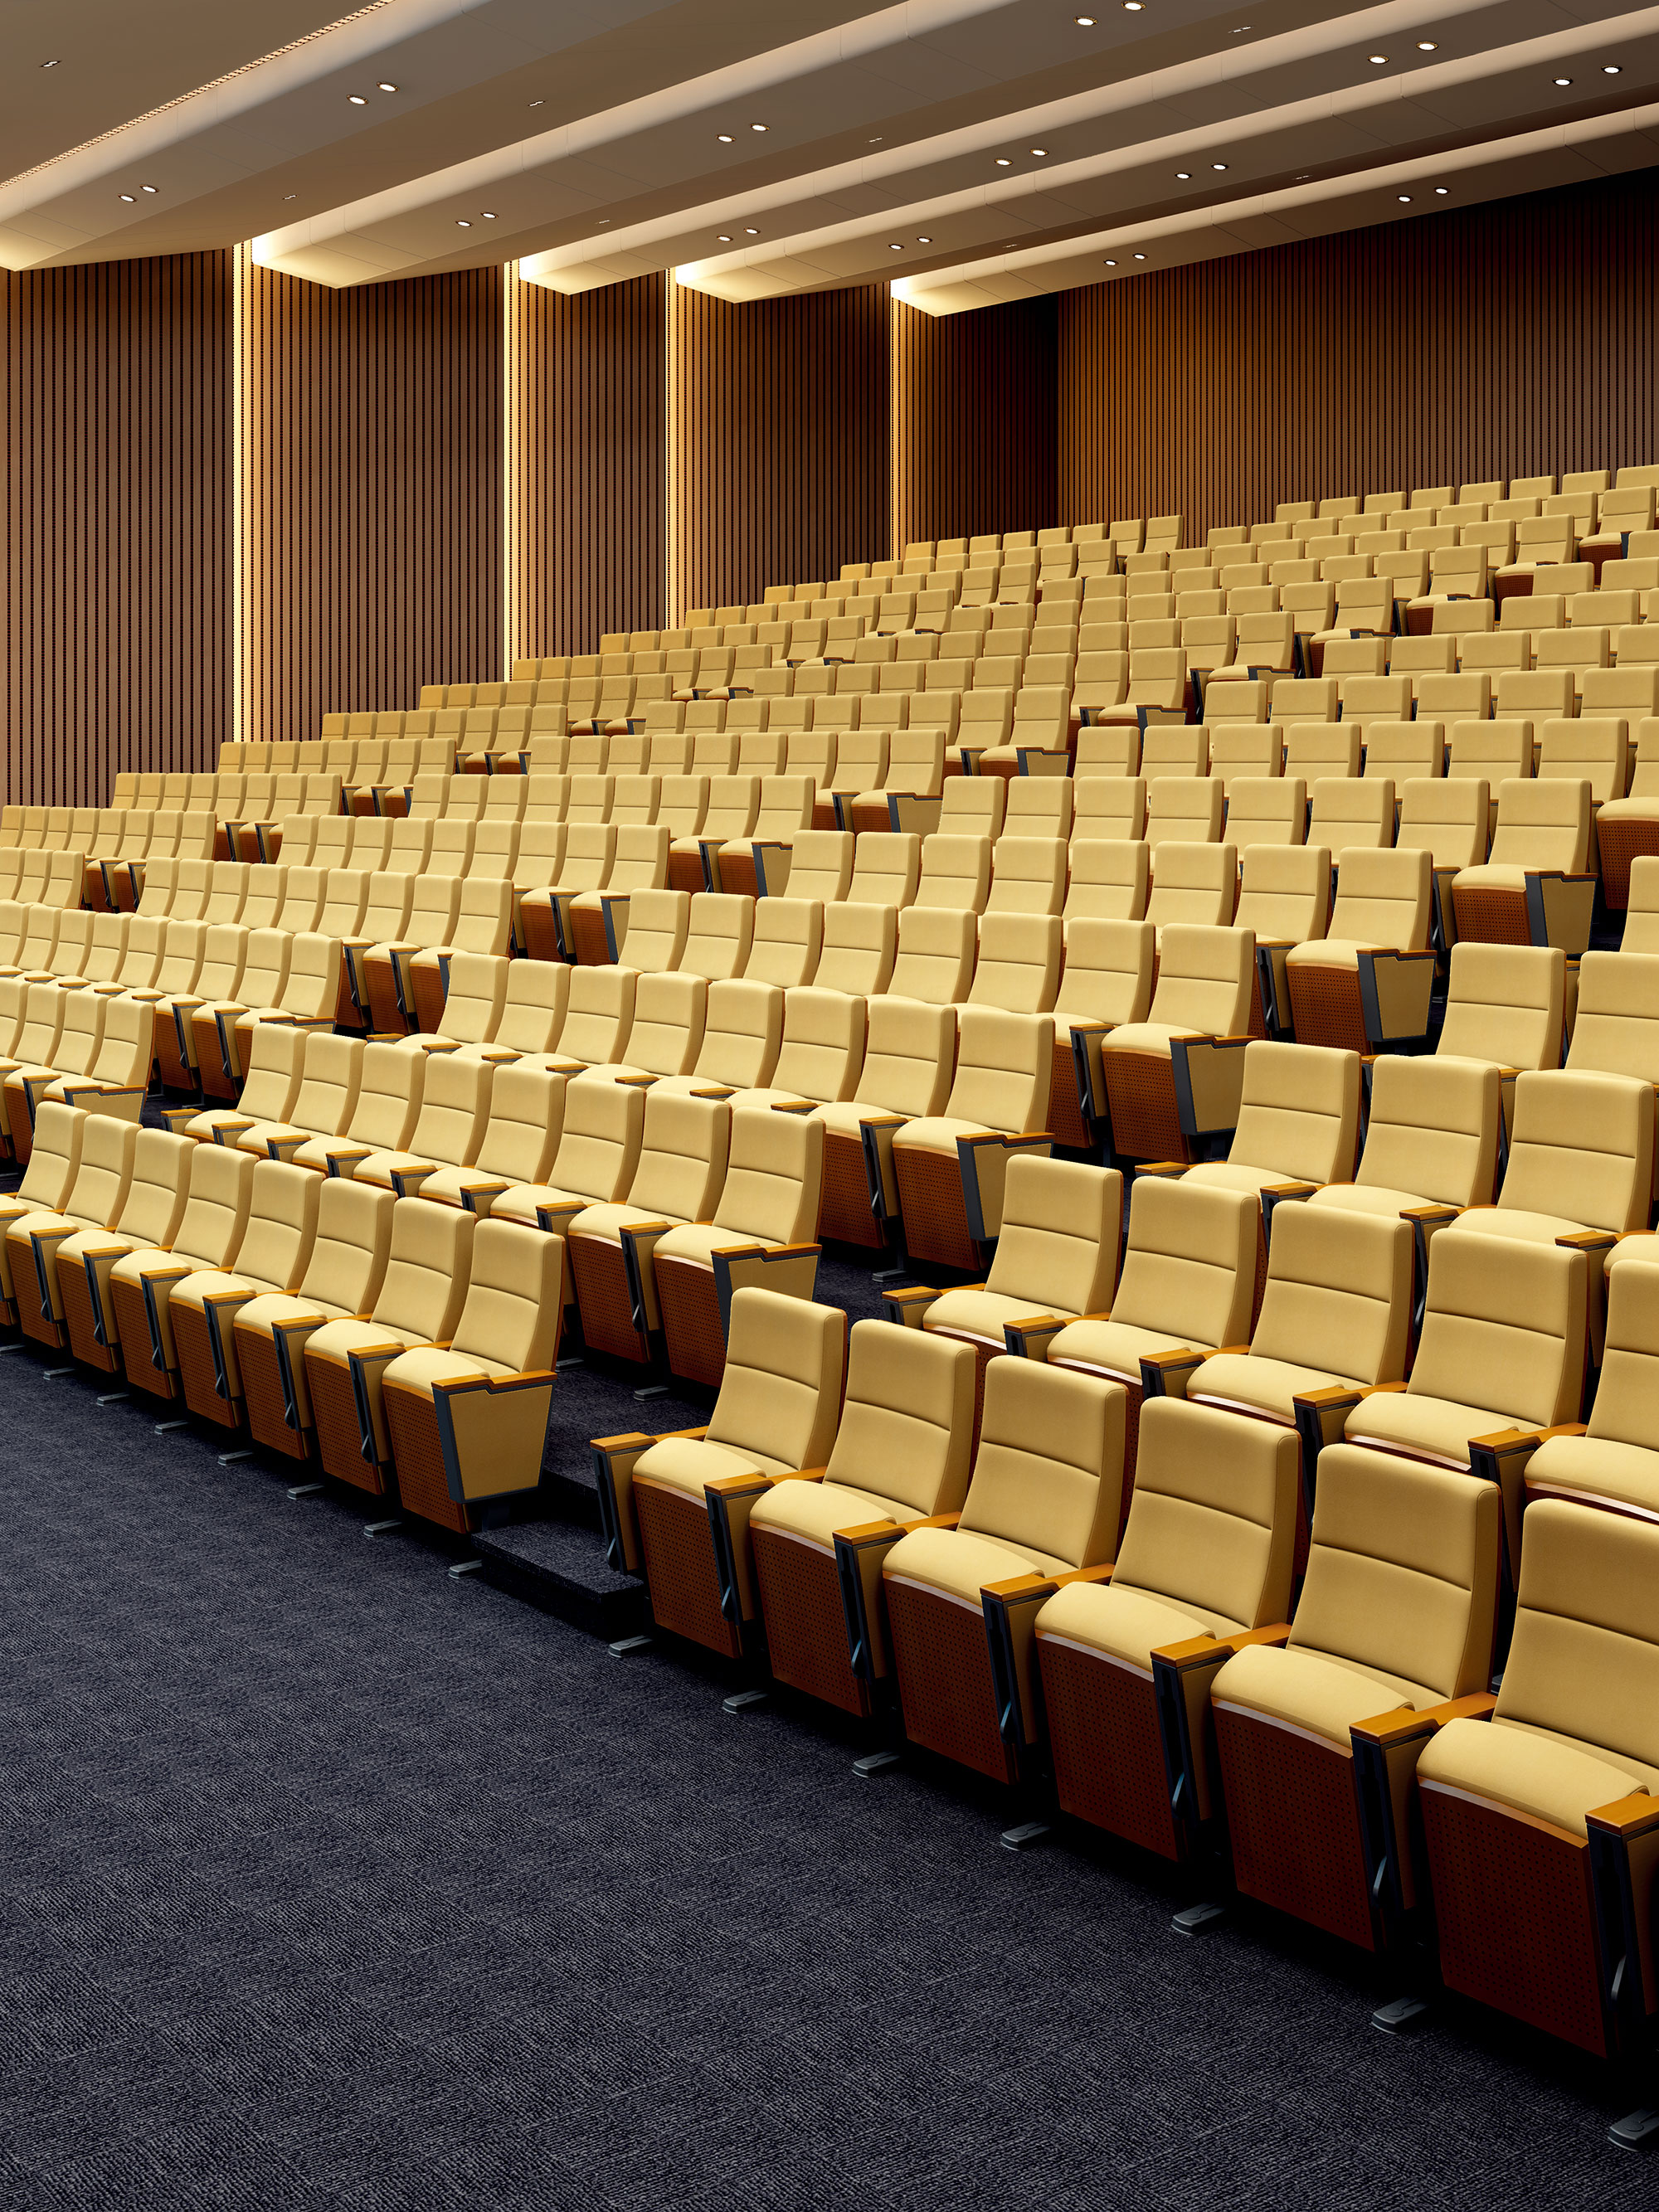 The rationality and malleability of auditorium seat design？